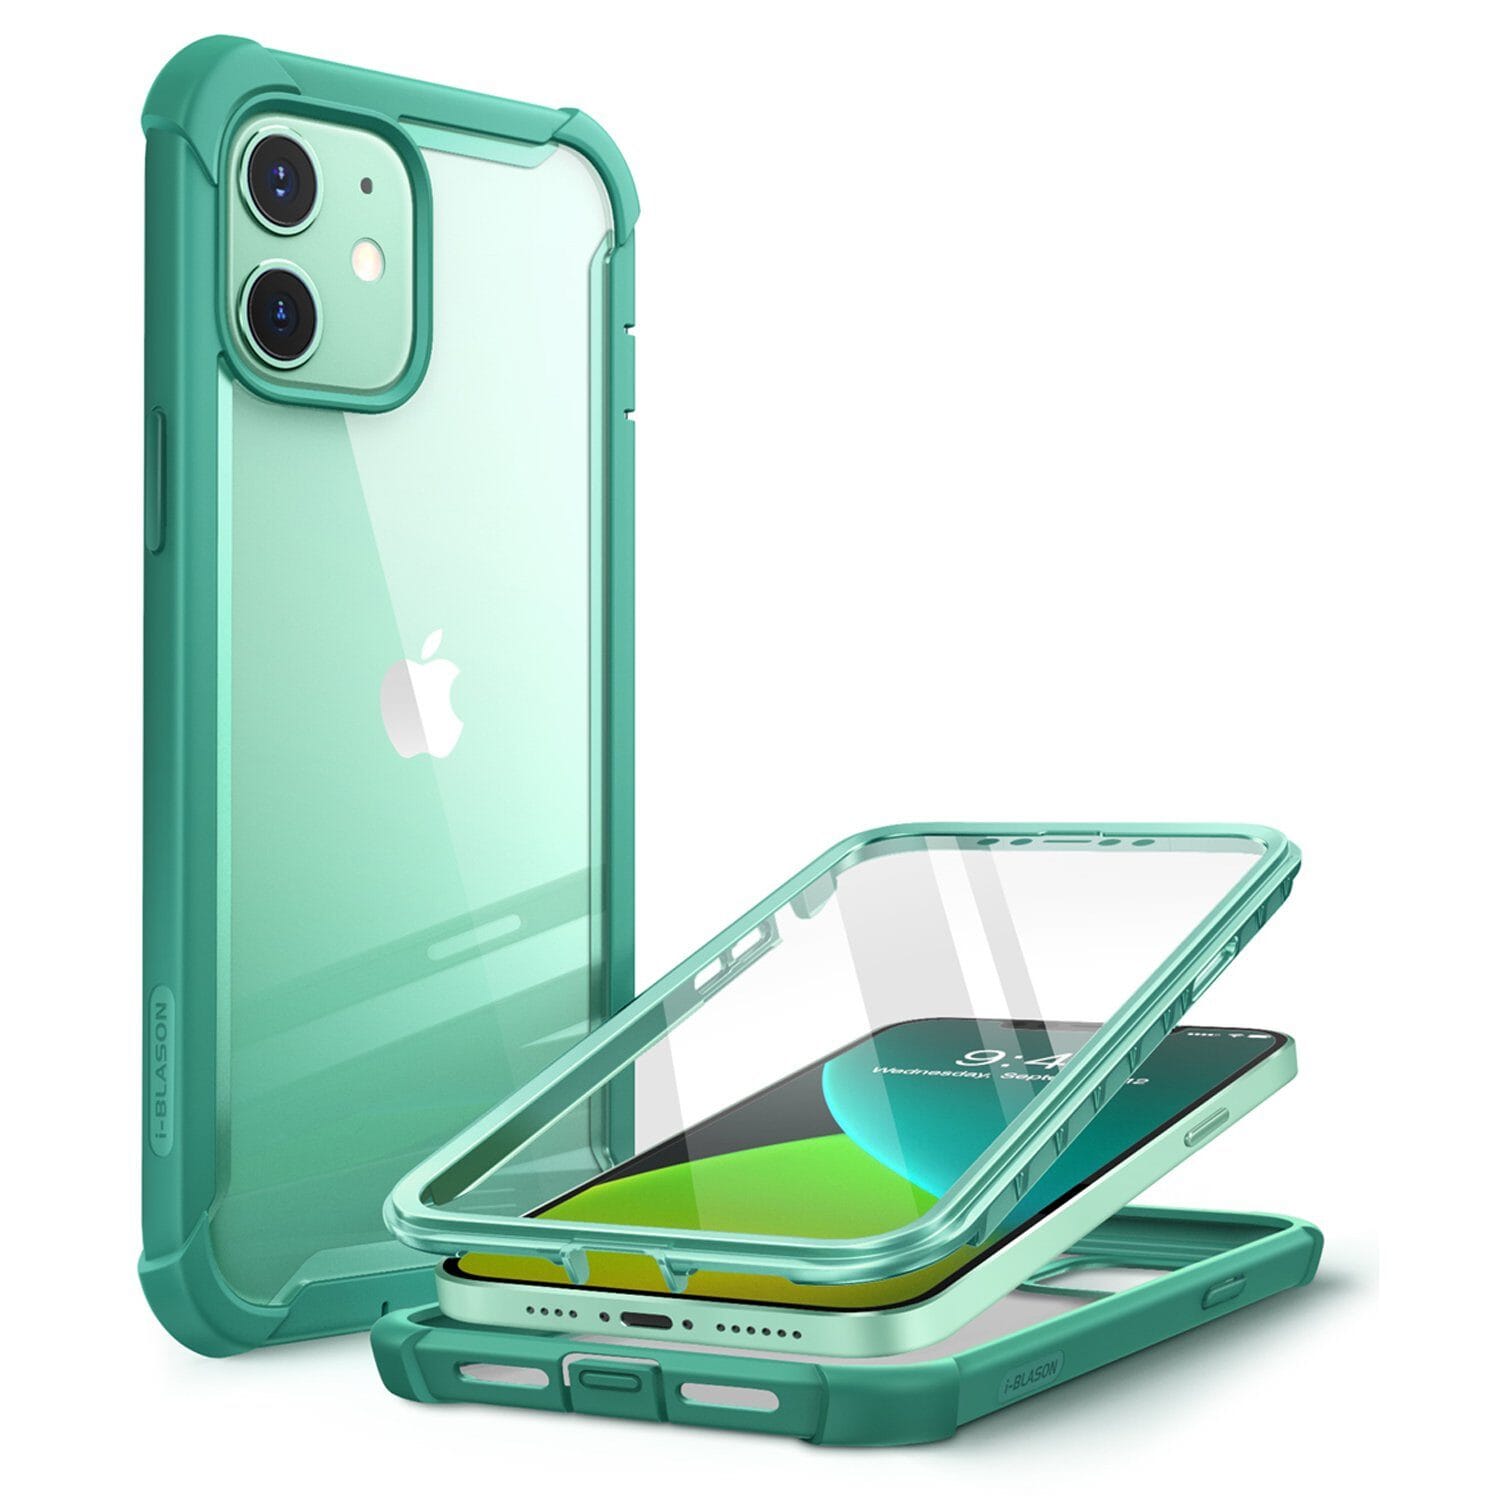 i-Blason Ares Series Rugged Clear Bumper Case for iPhone 12 Series (With Build-in Screen Protector) iPhone 12 Series i-Blason Mint Green iPhone 12 Mini 5.4" 